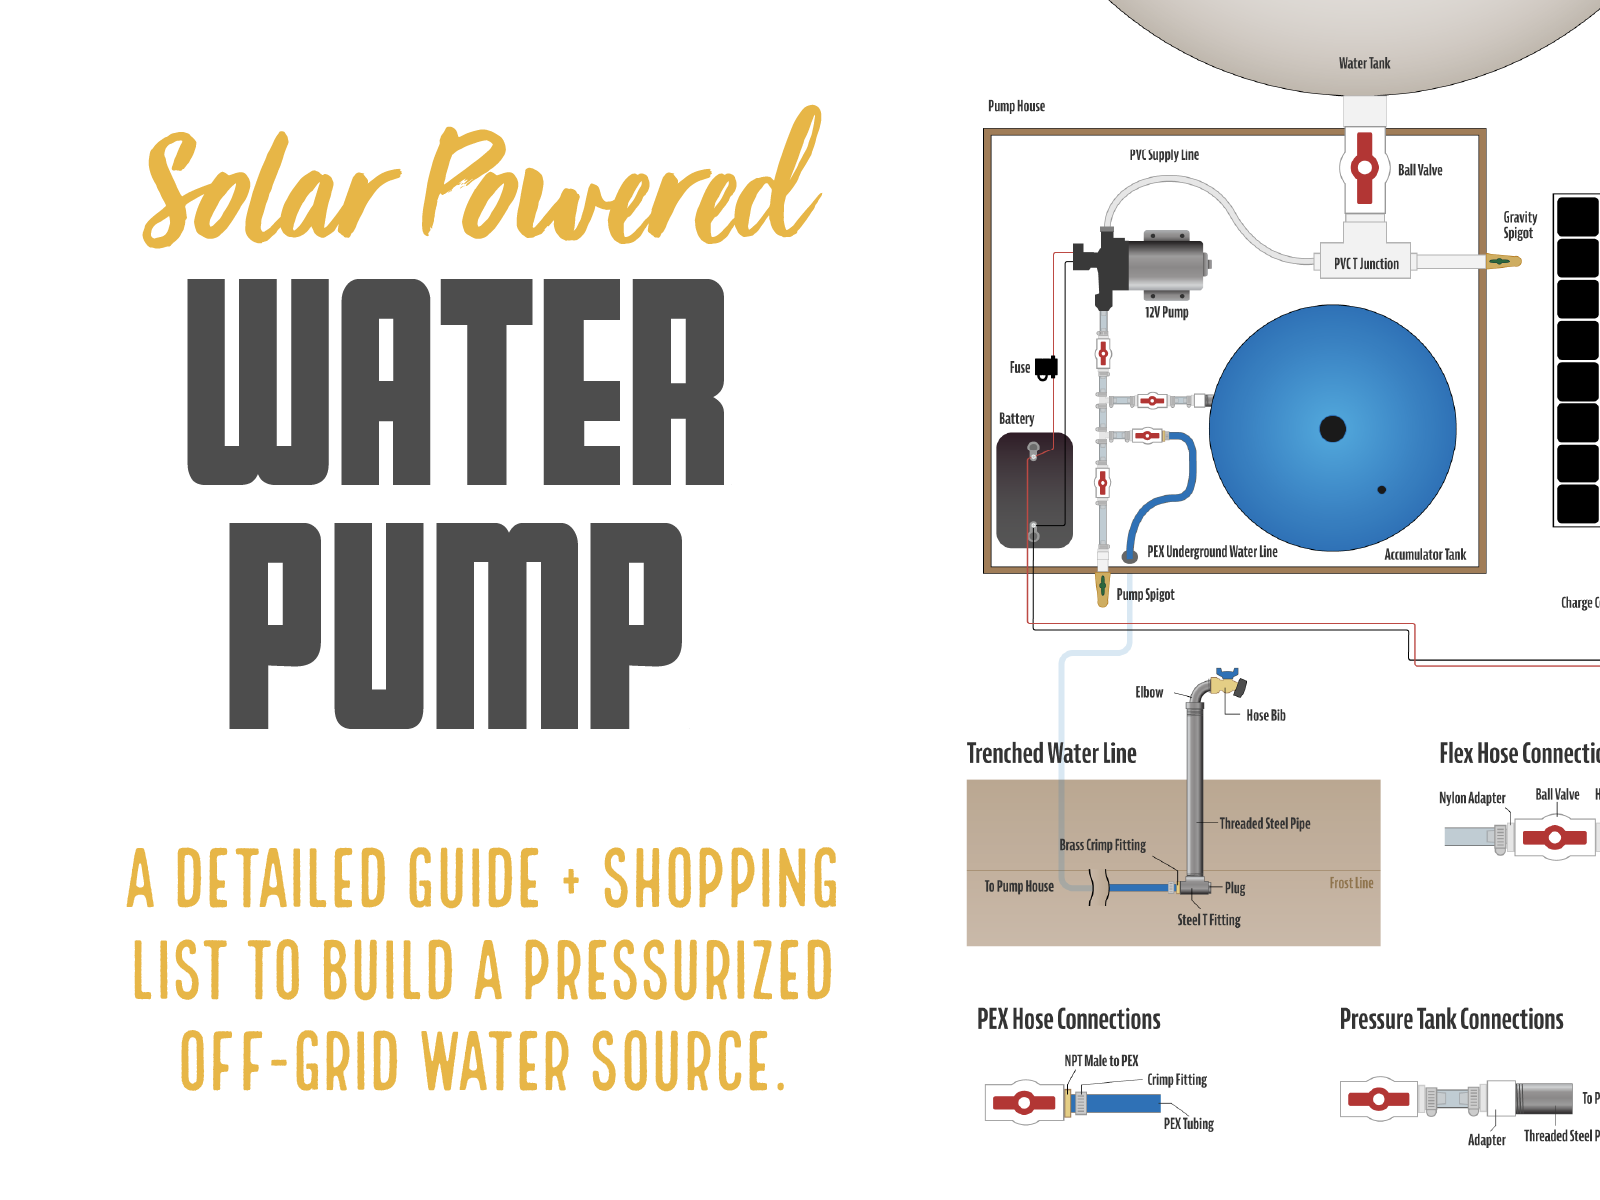 Solar Powered Water Pump - A detailed guide + shopping list to build a pressurized off-grid water source.